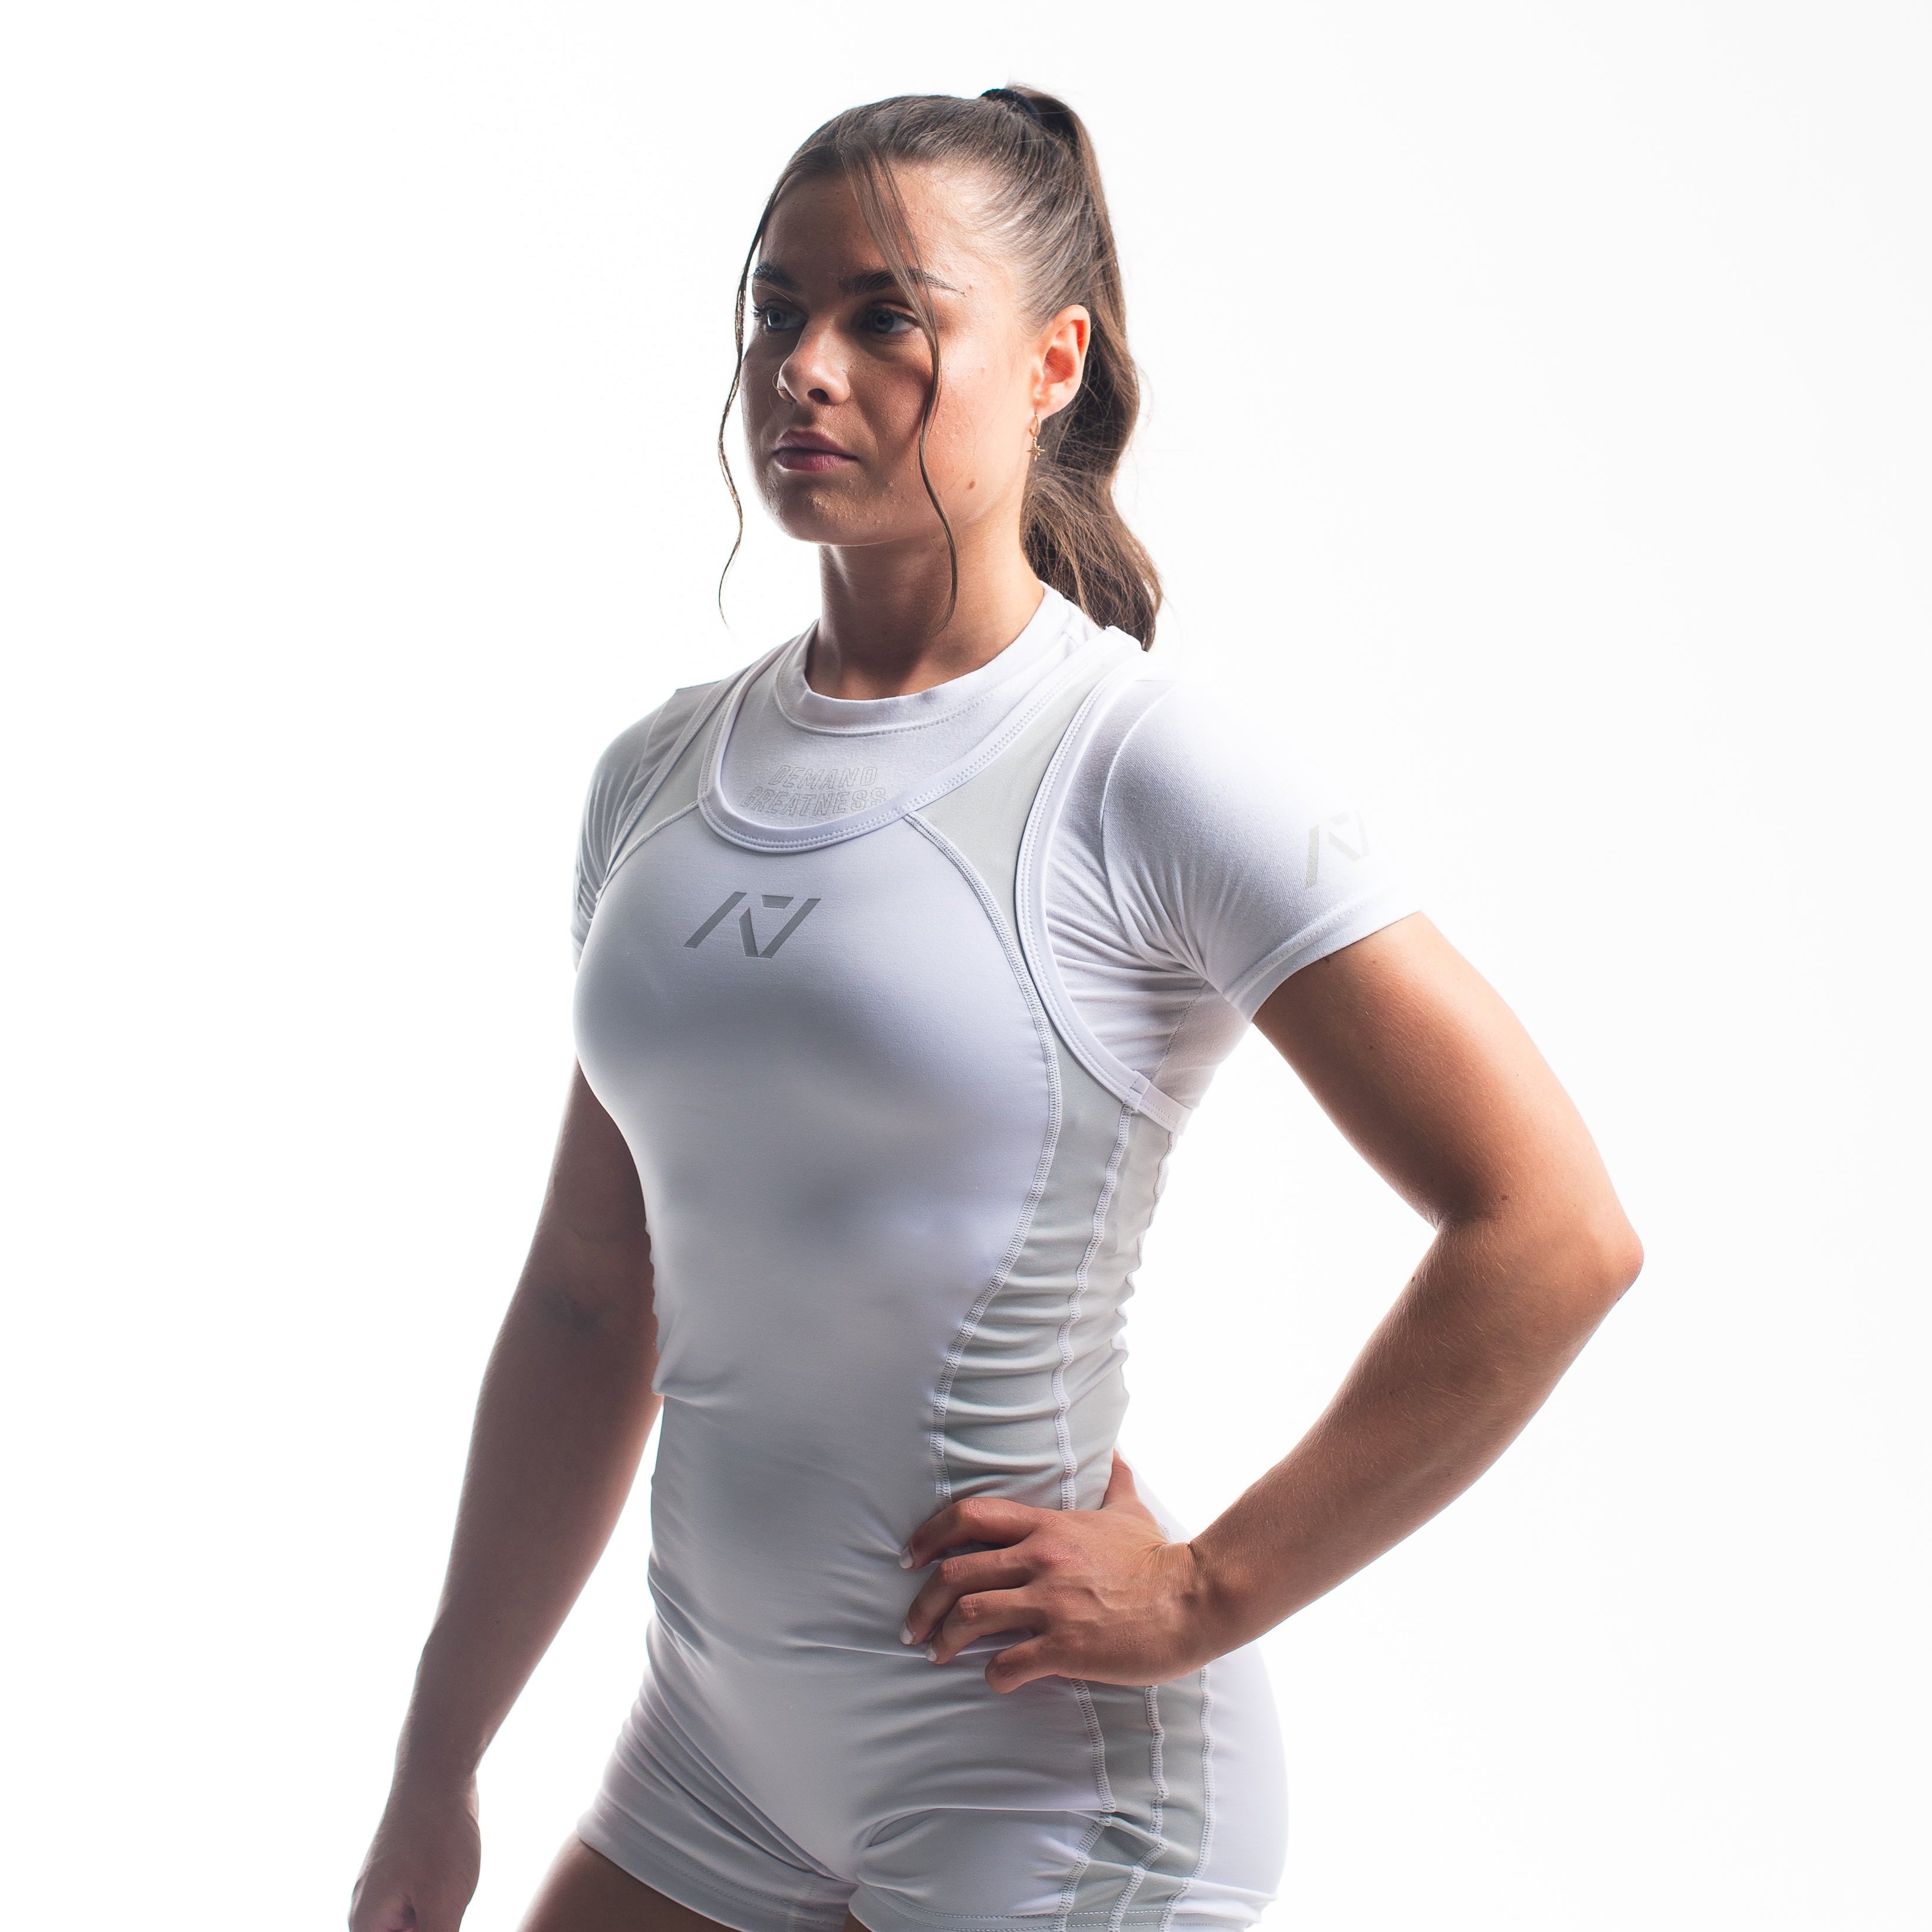 A7 IPF Approved Polar Luno singlet features extra lat mobility, side panel stitching to guide the squat depth level and curved panel design for a slimming look. The Women's cut singlet features a tapered waist and additional quad room. The IPF Approved Kit includes Luno Powerlifting Singlet, A7 Meet Shirt, A7 Zebra Wrist Wraps, A7 Deadlift Socks, Hourglass Knee Sleeves (Stiff Knee Sleeves and Rigor Mortis Knee Sleeves). All A7 Powerlifting Equipment shipping to UK, Norway, Switzerland and Iceland.